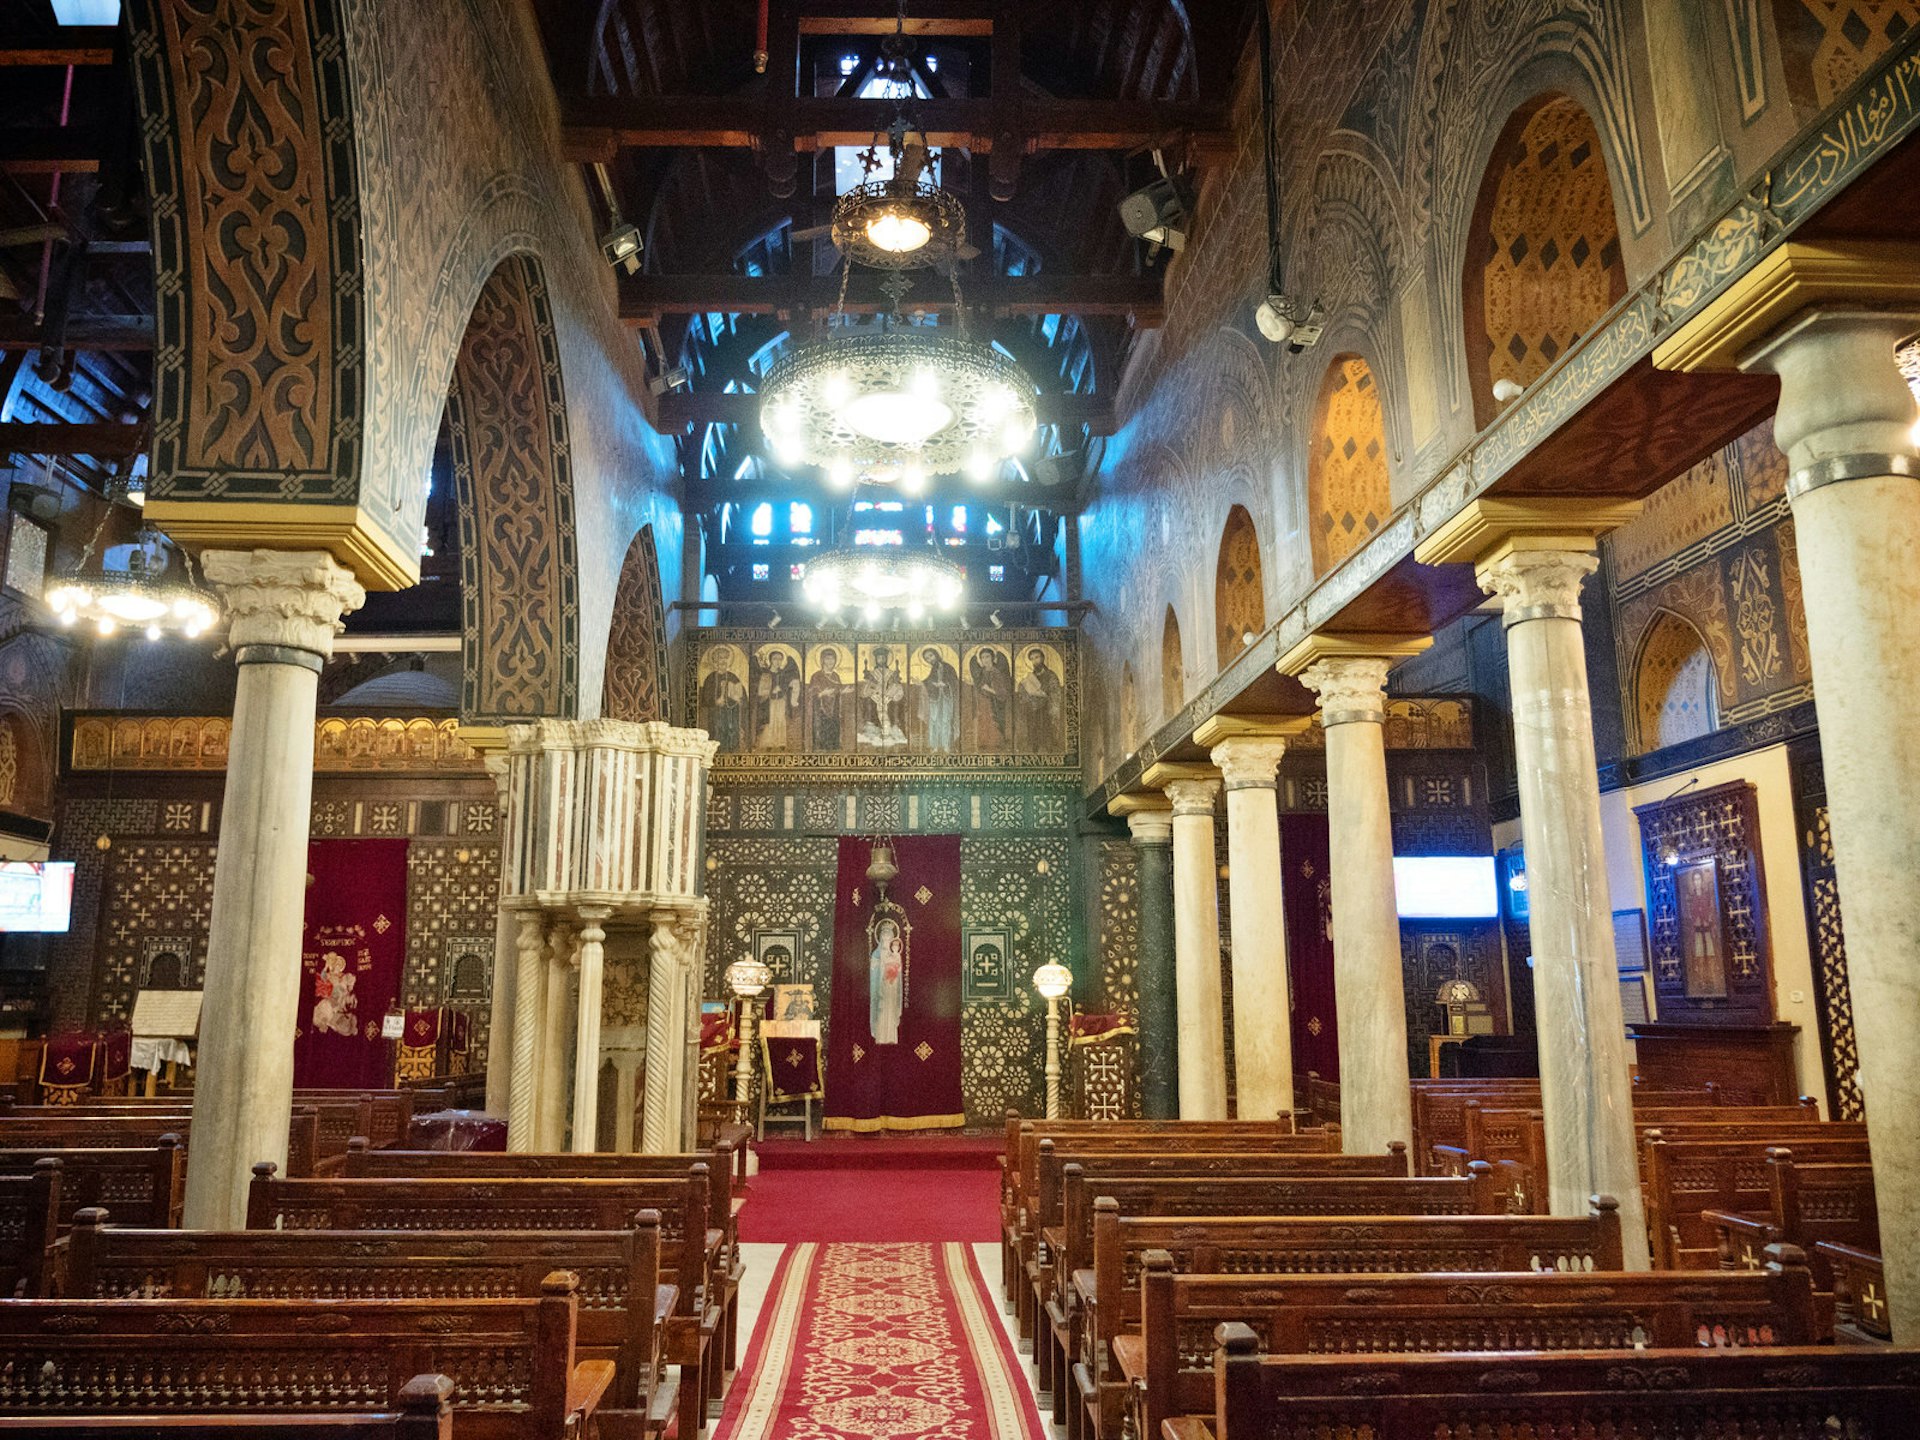 The church interior is dominated by gold patterns on the walls, contrasting with a predominately red carpet and dark wood chairs. Two large circular lights hang down above the central aisle.